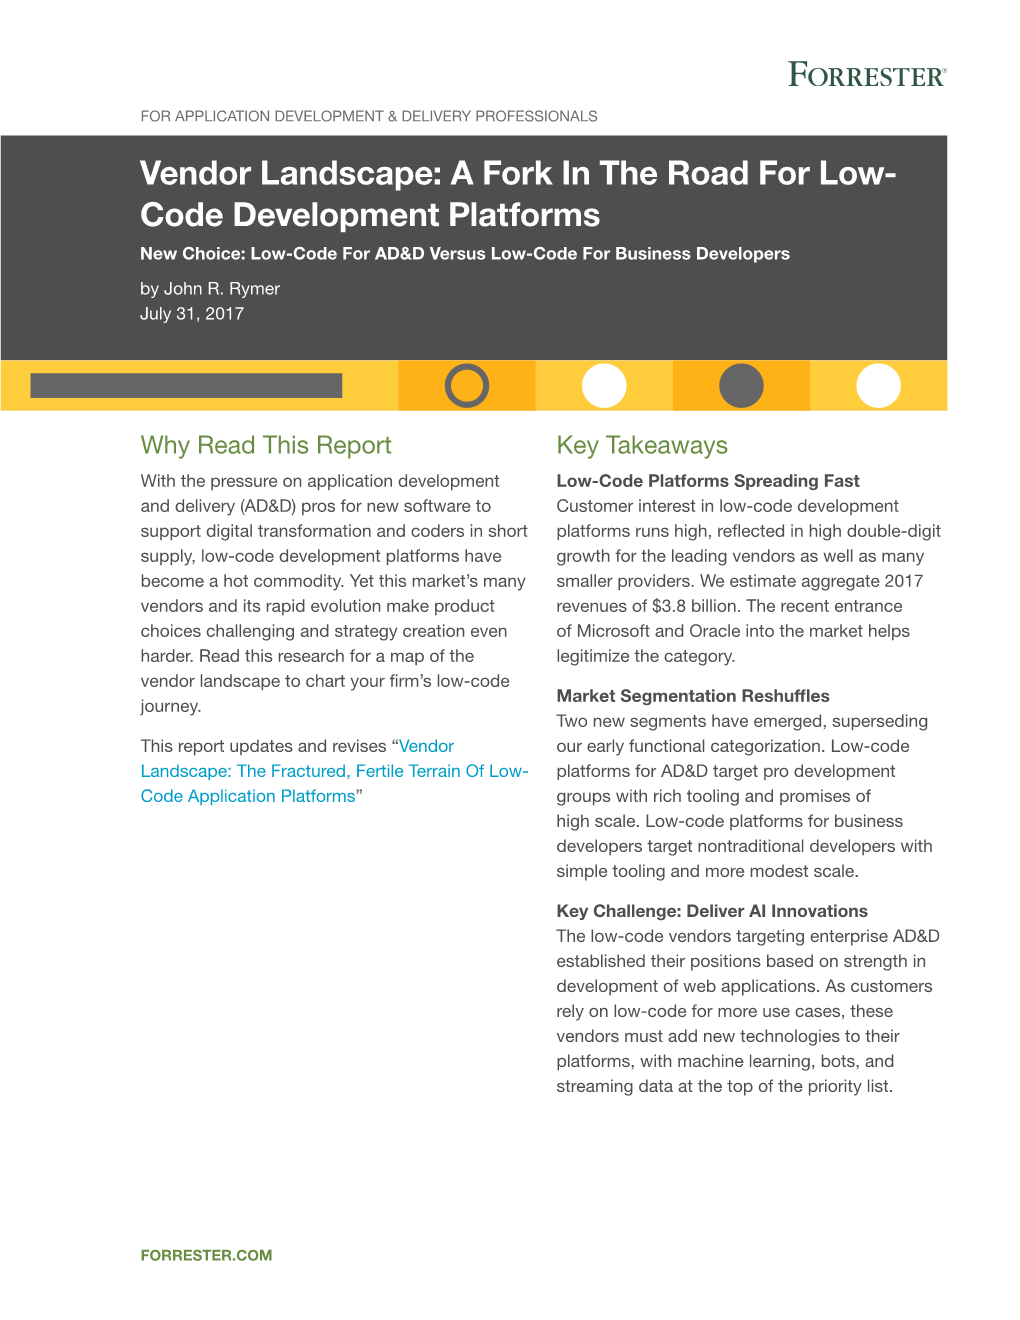 Vendor Landscape: a Fork in the Road for Low- Code Development Platforms New Choice: Low-Code for AD&D Versus Low-Code for Business Developers by John R